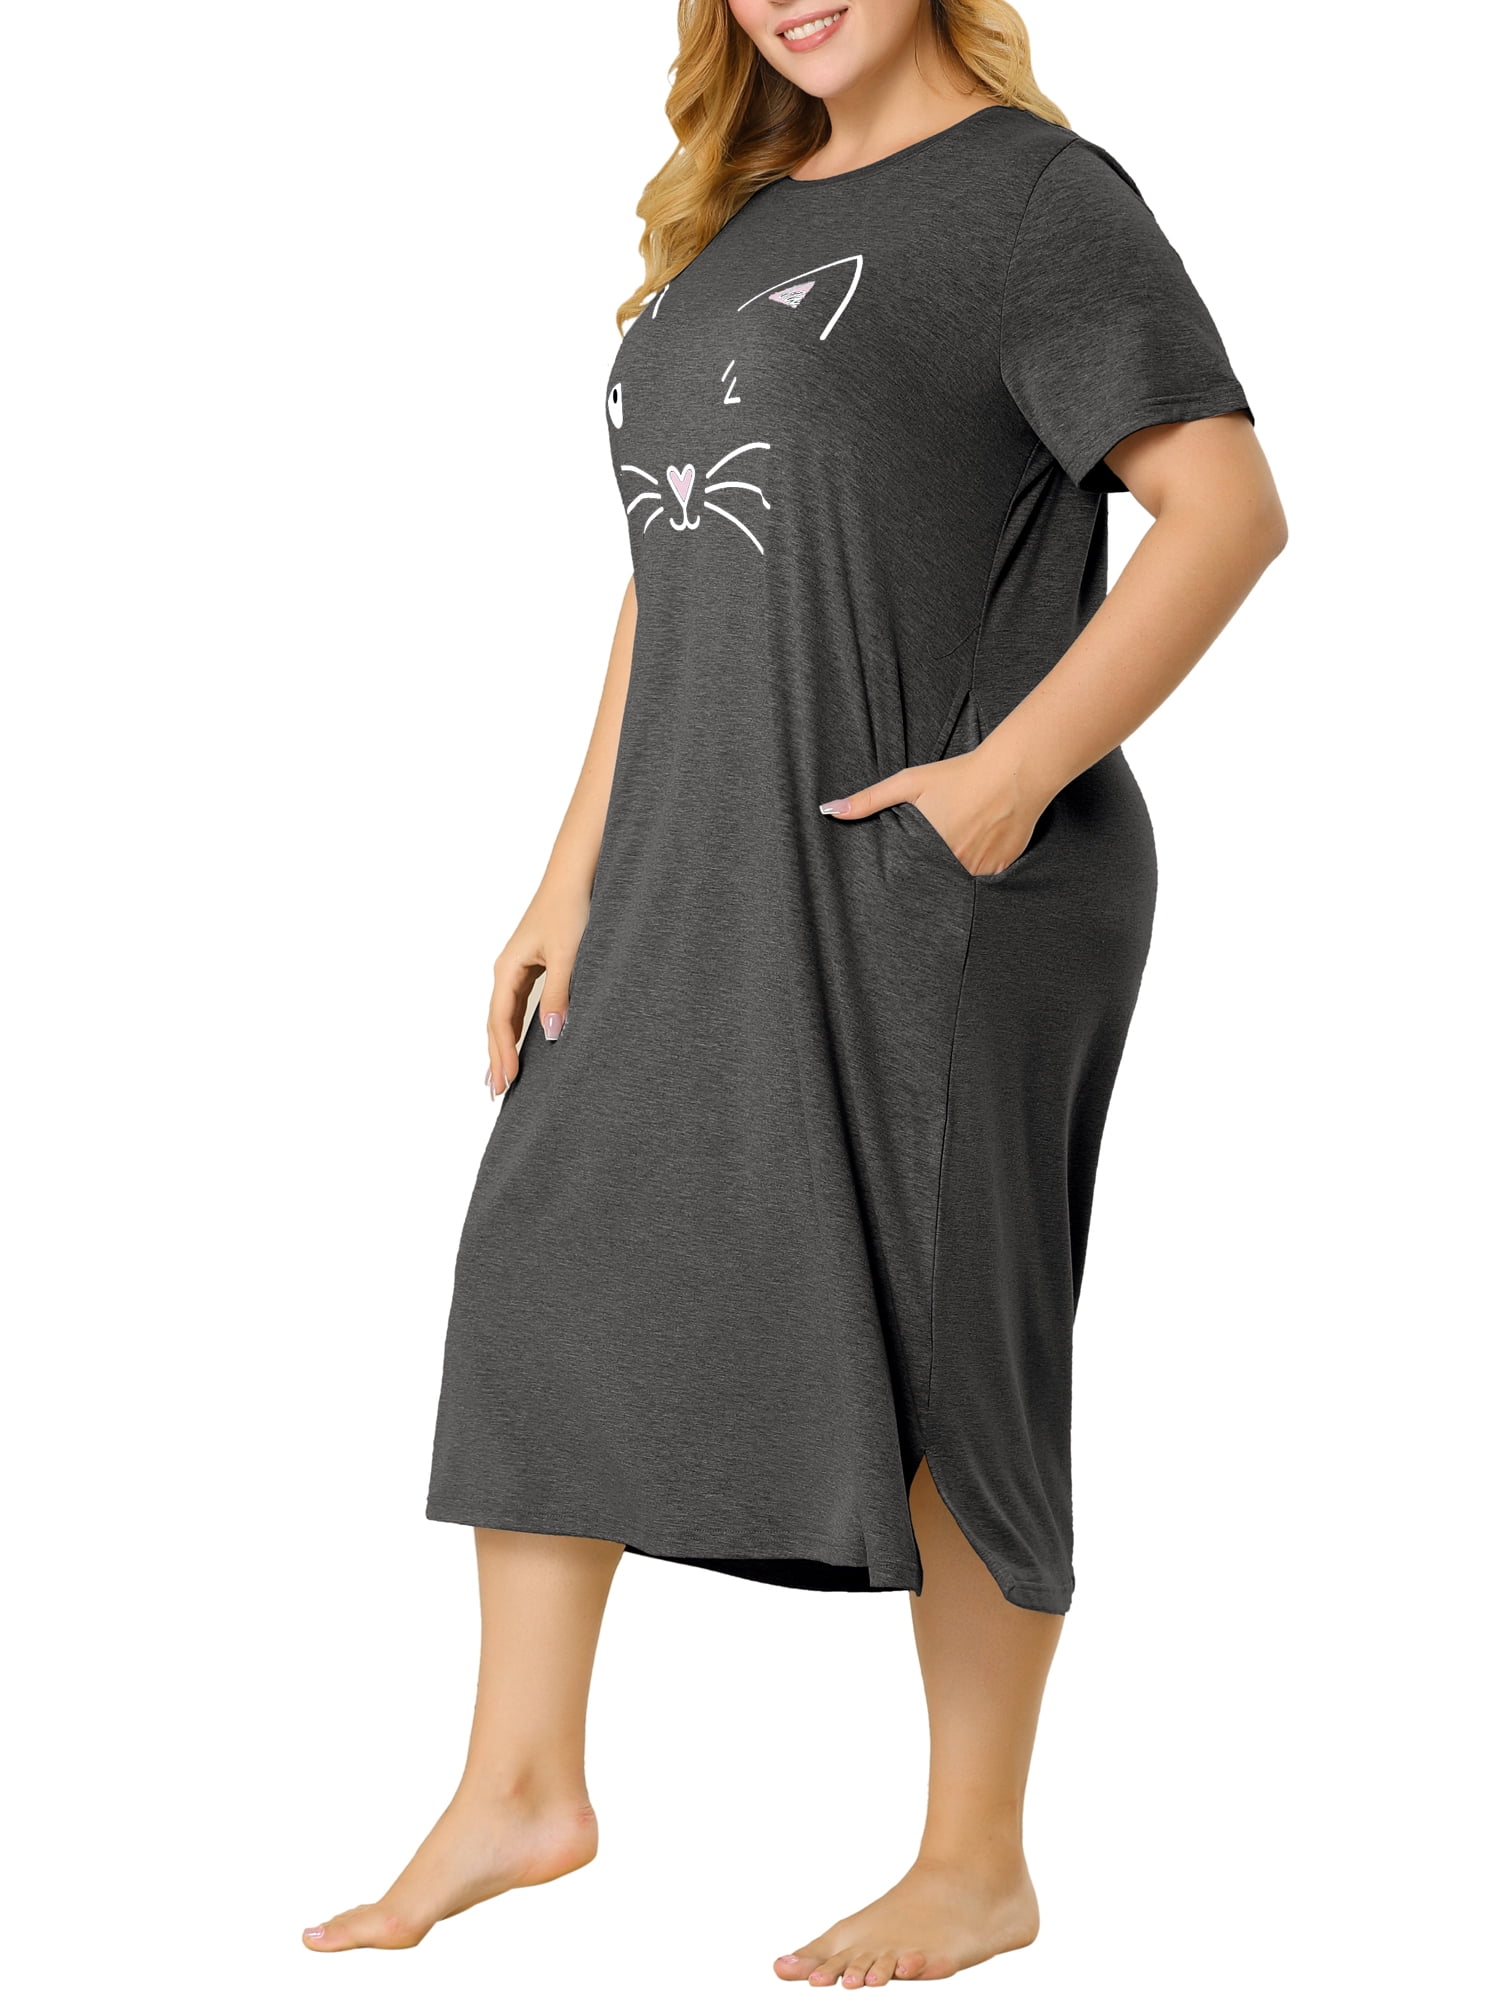  VREWARE plus size women winter,cheap nightgowns for women,cheap  stuff under 50 cents,best of seller womens clothing,cheap clothes for  women,delivery costume,dollar store : Clothing, Shoes & Jewelry